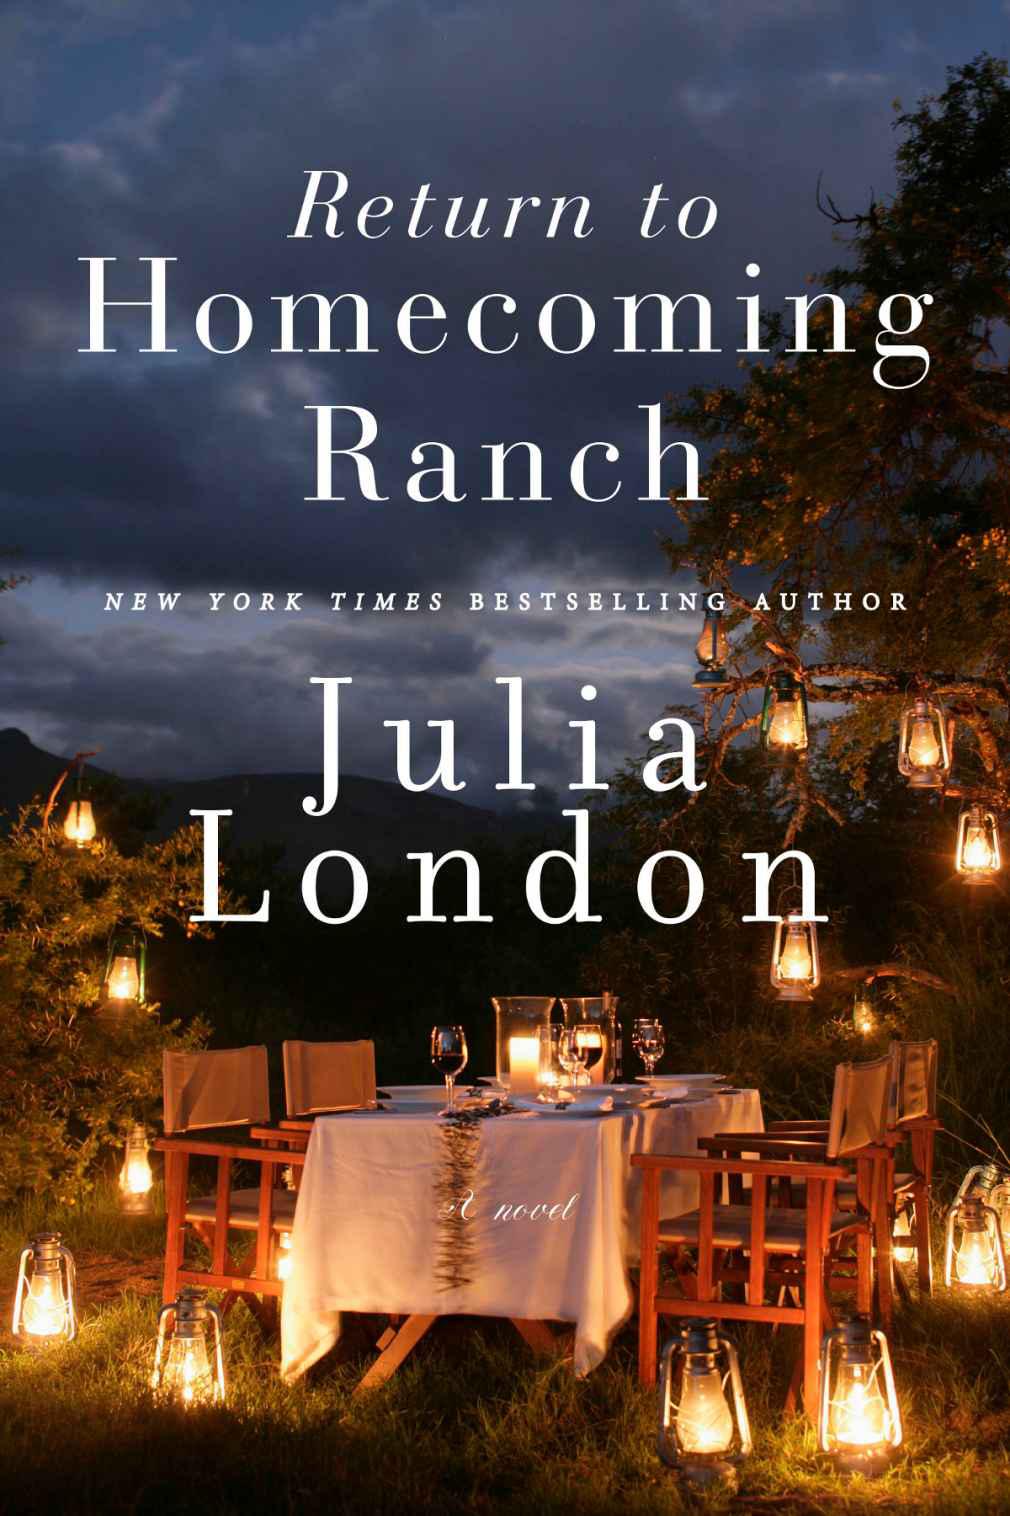 Return to Homecoming Ranch (Pine River) by Julia London